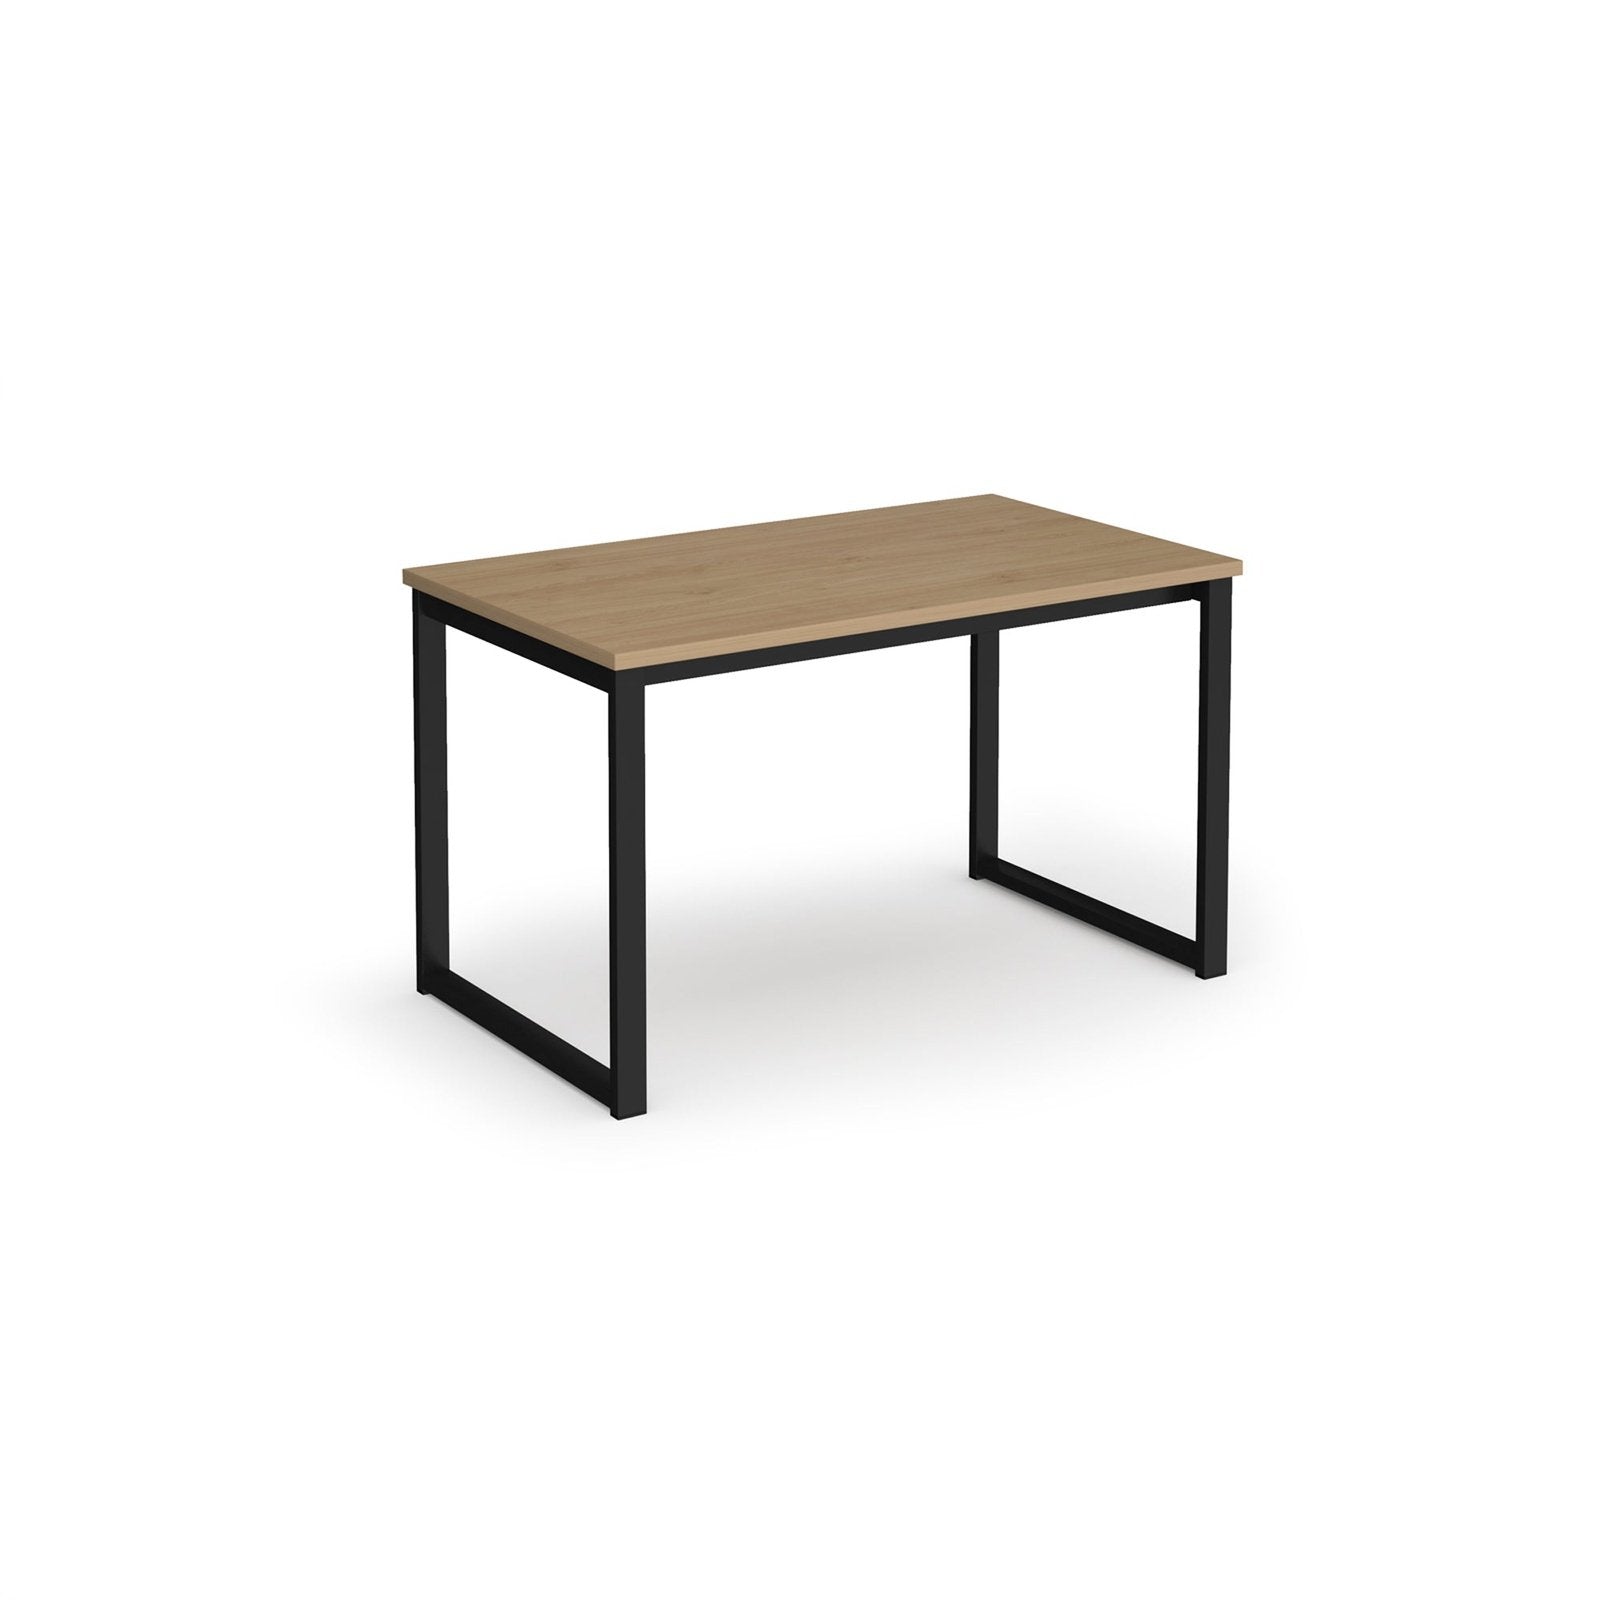 Otto benching solution dining table - Office Products Online